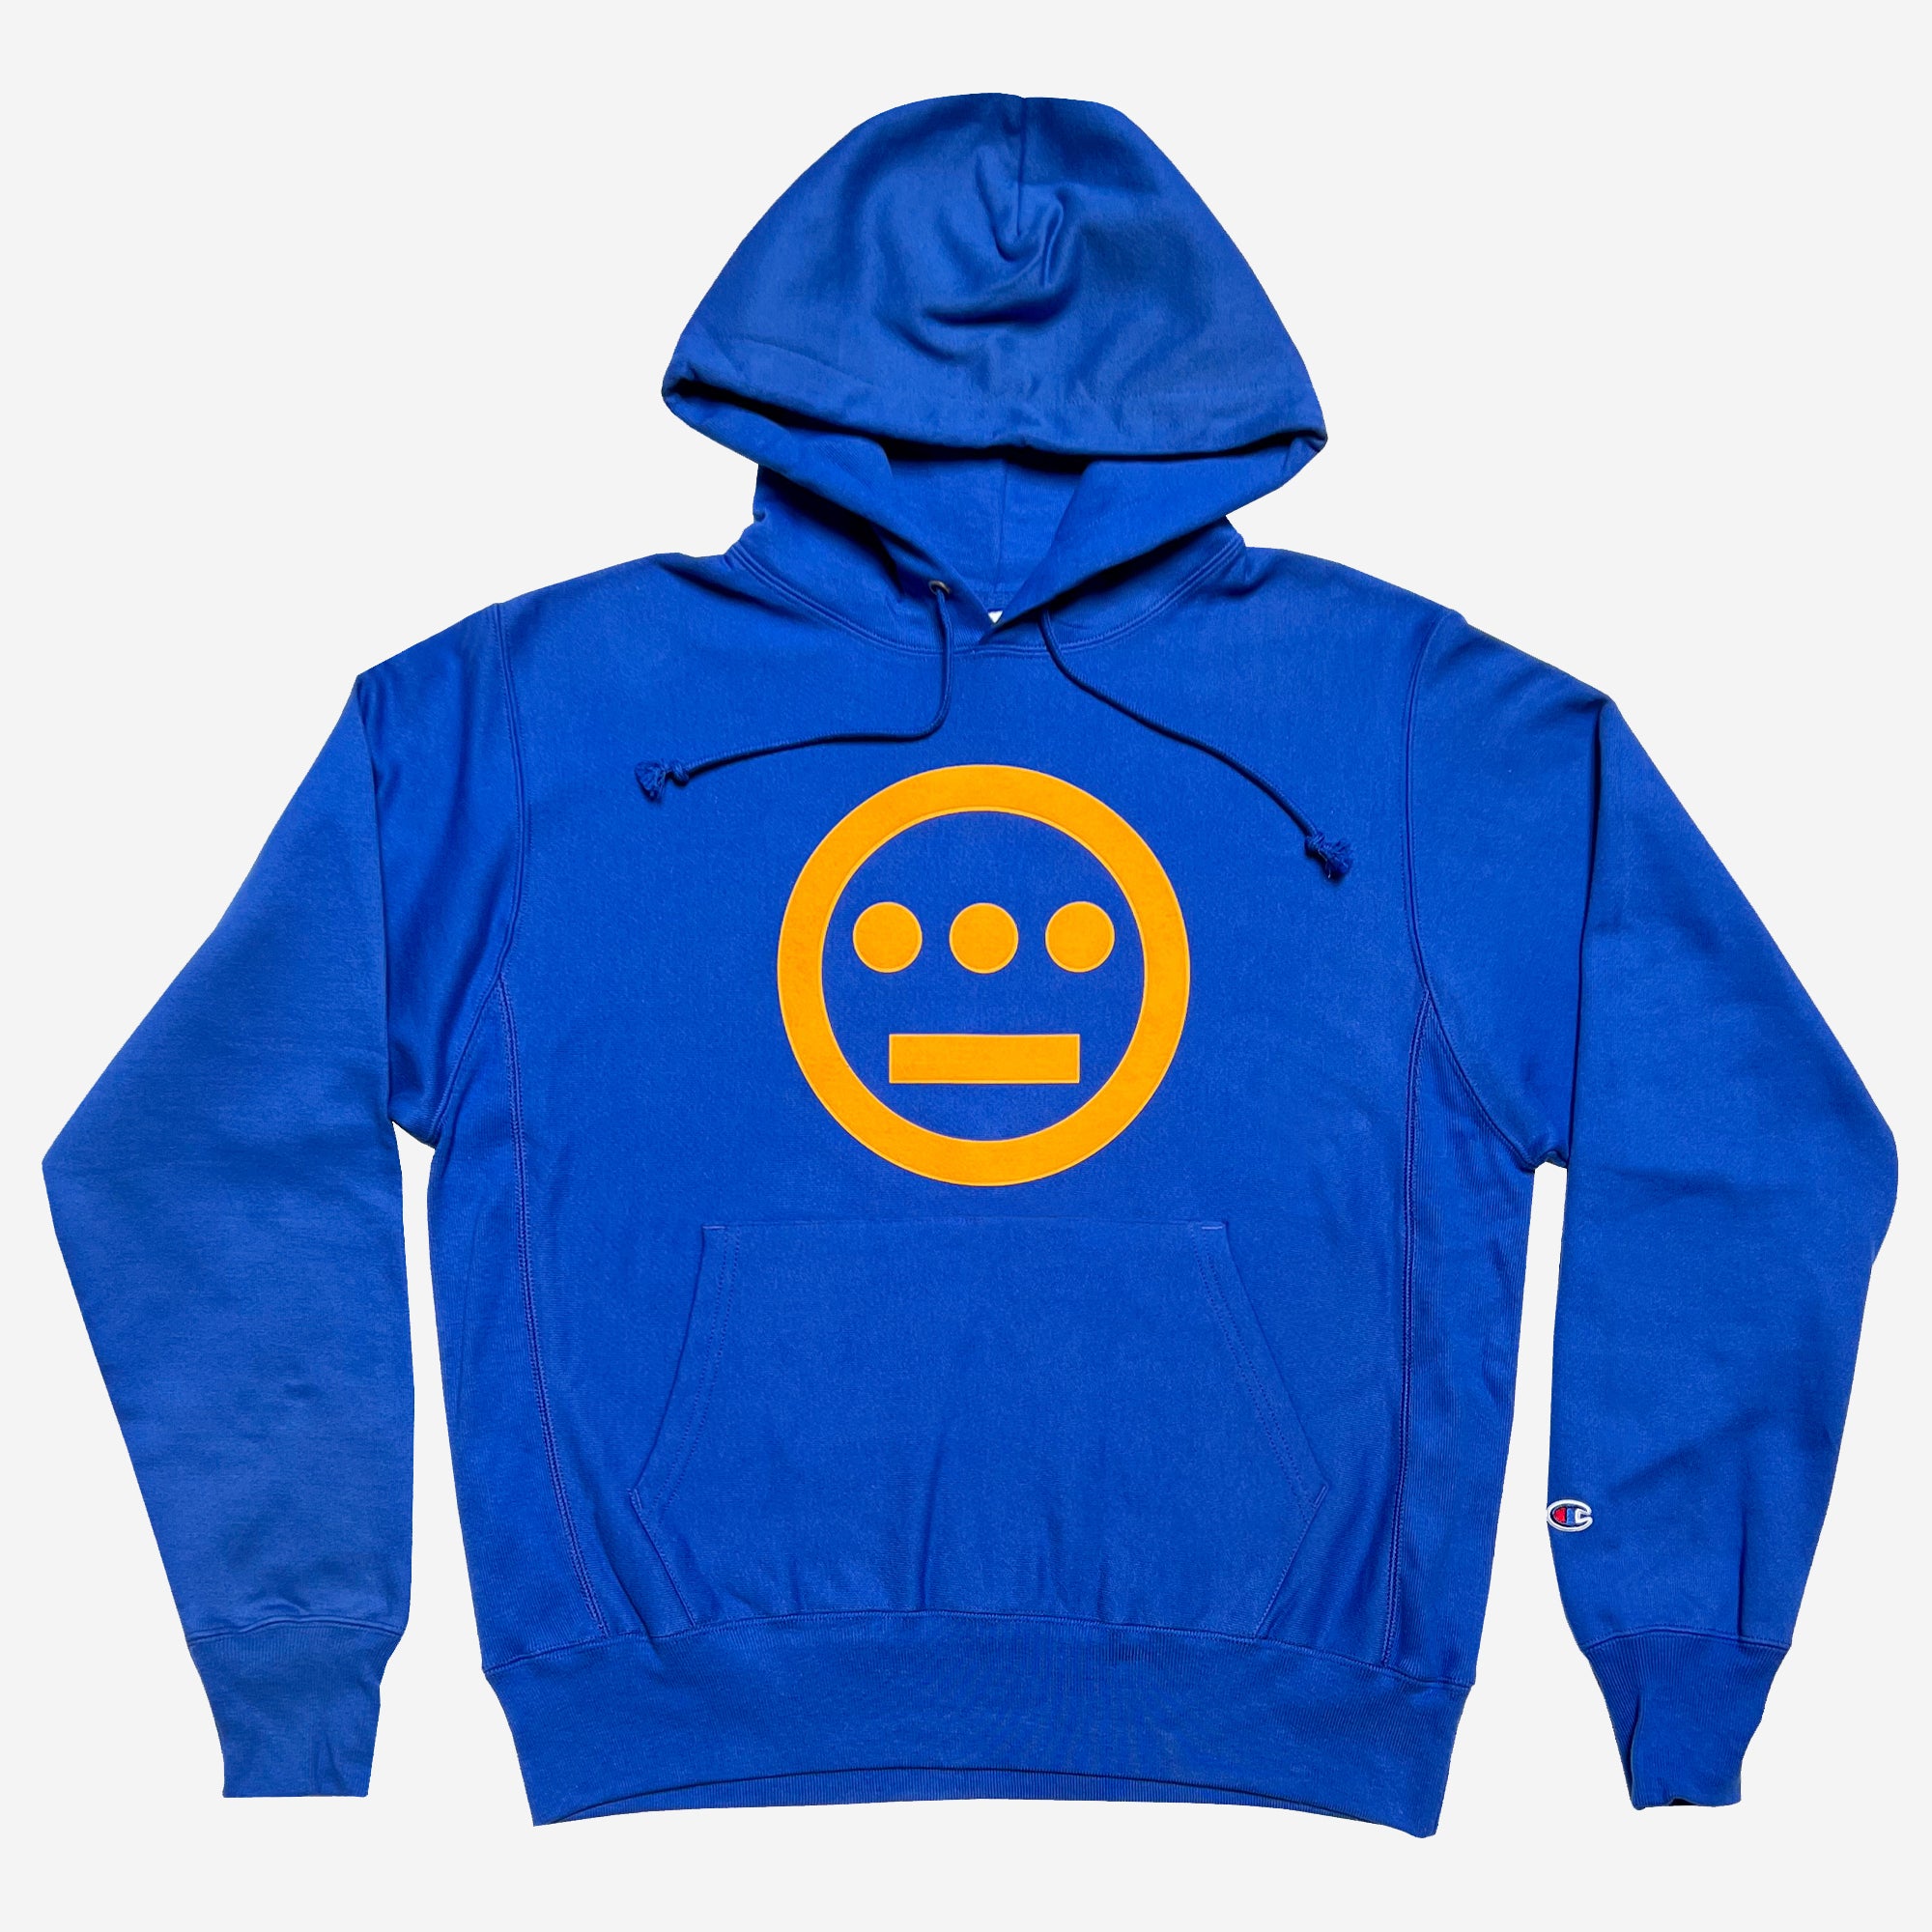 Royal blue hoodie with yellow Hieroglyphics hip-hop logo on the chest and Champion logo on the sleeve.